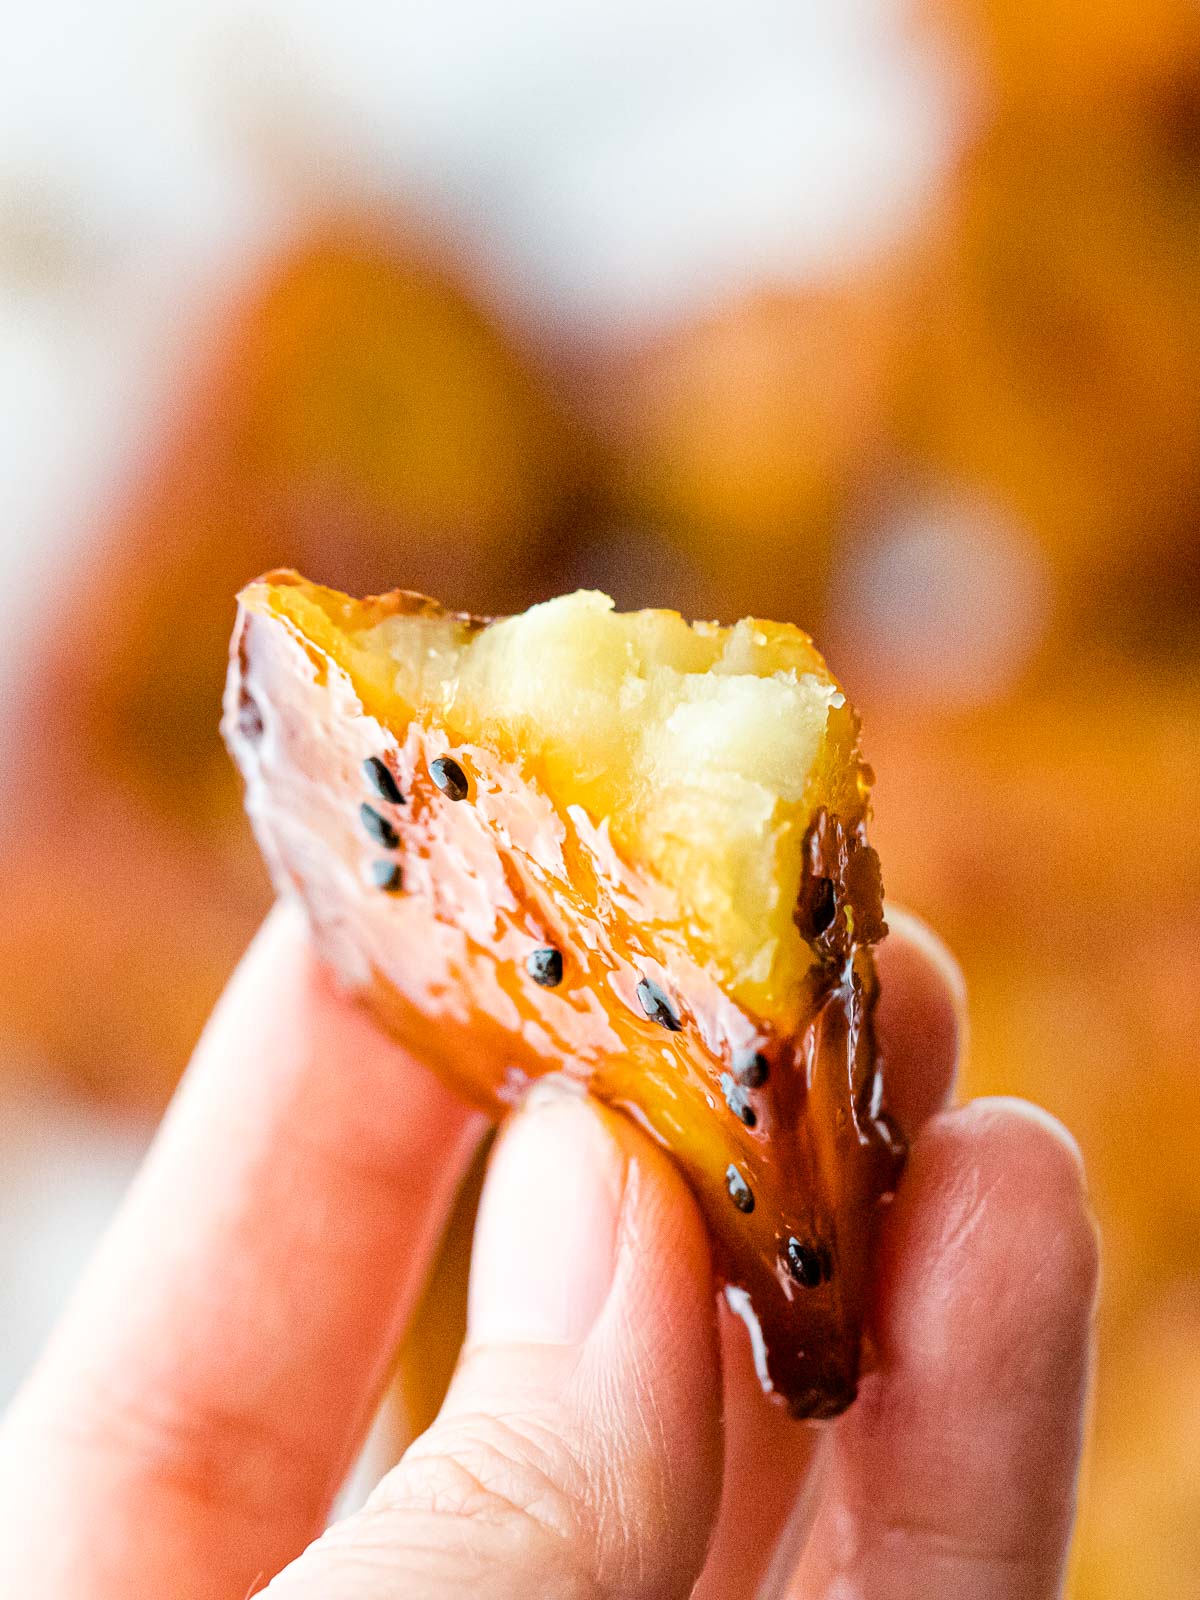 hand holding Korean caramelized sweet potato showing fluffy inside with hard candy shell